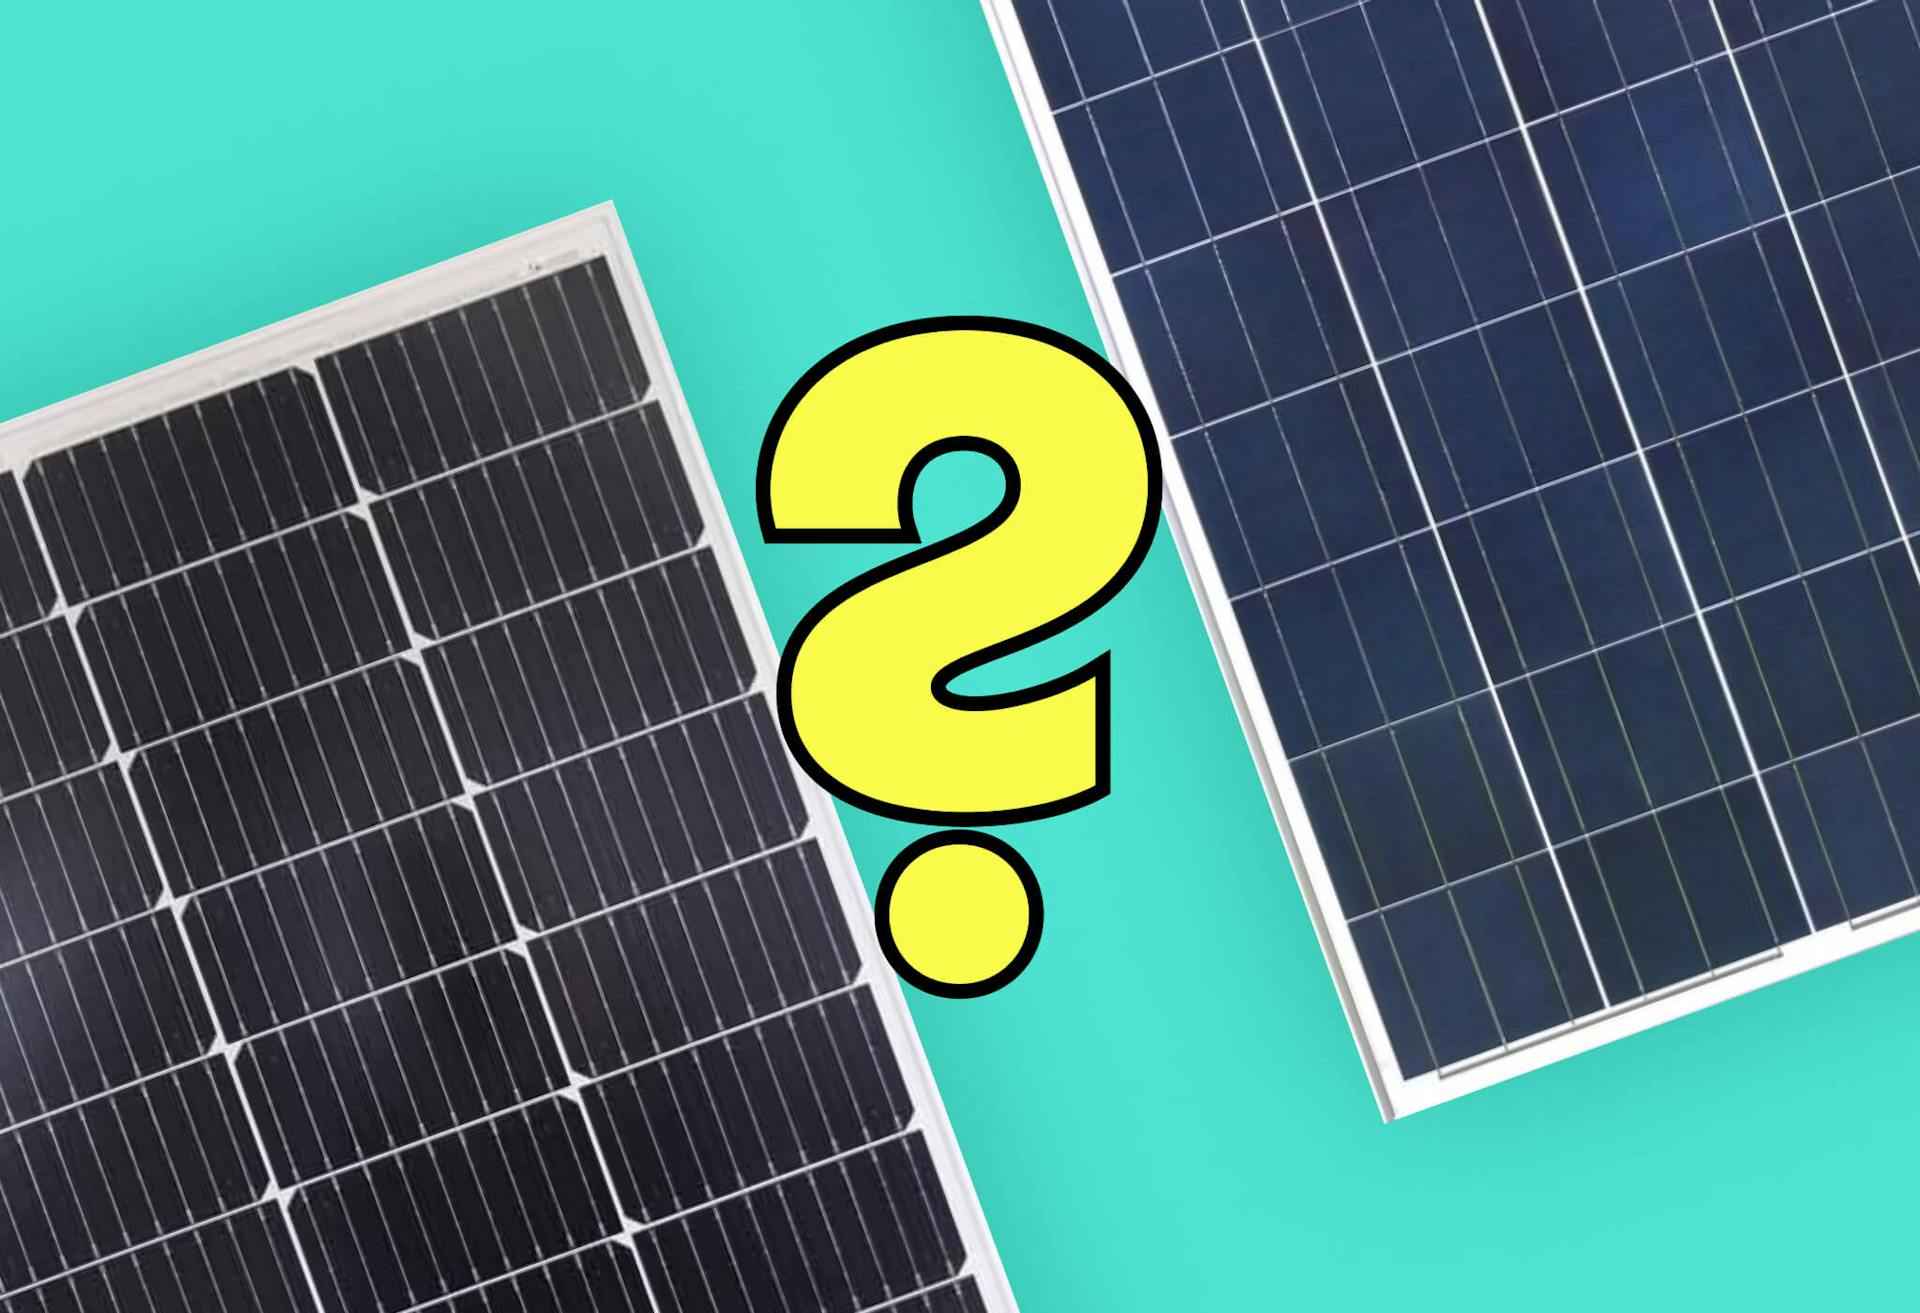 A monocrystalline solar panel next to a polycrystalline solar panel with a yellow question mark in the middle